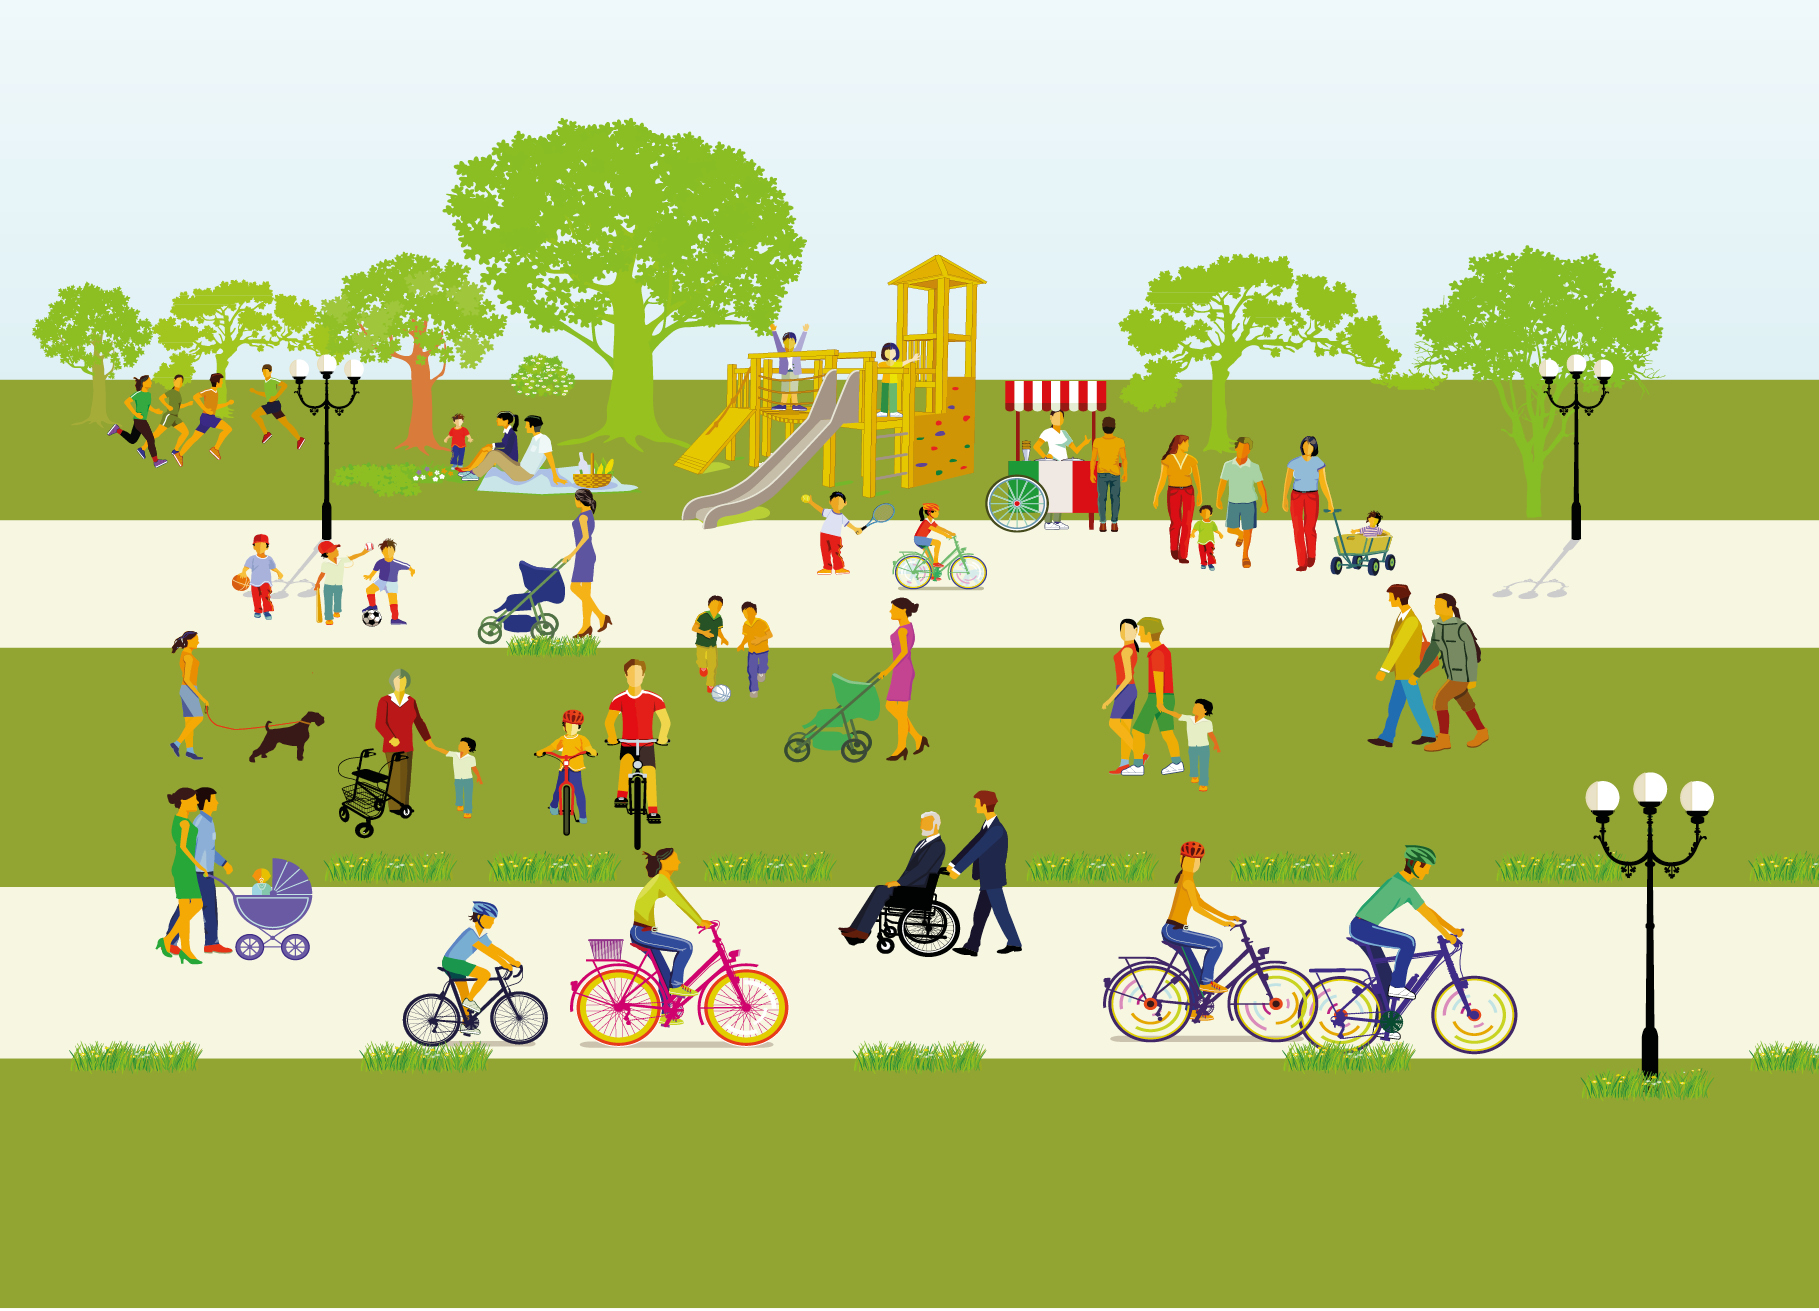 Graphic showing a range of people enjoying different leisure activities in a park-like setting